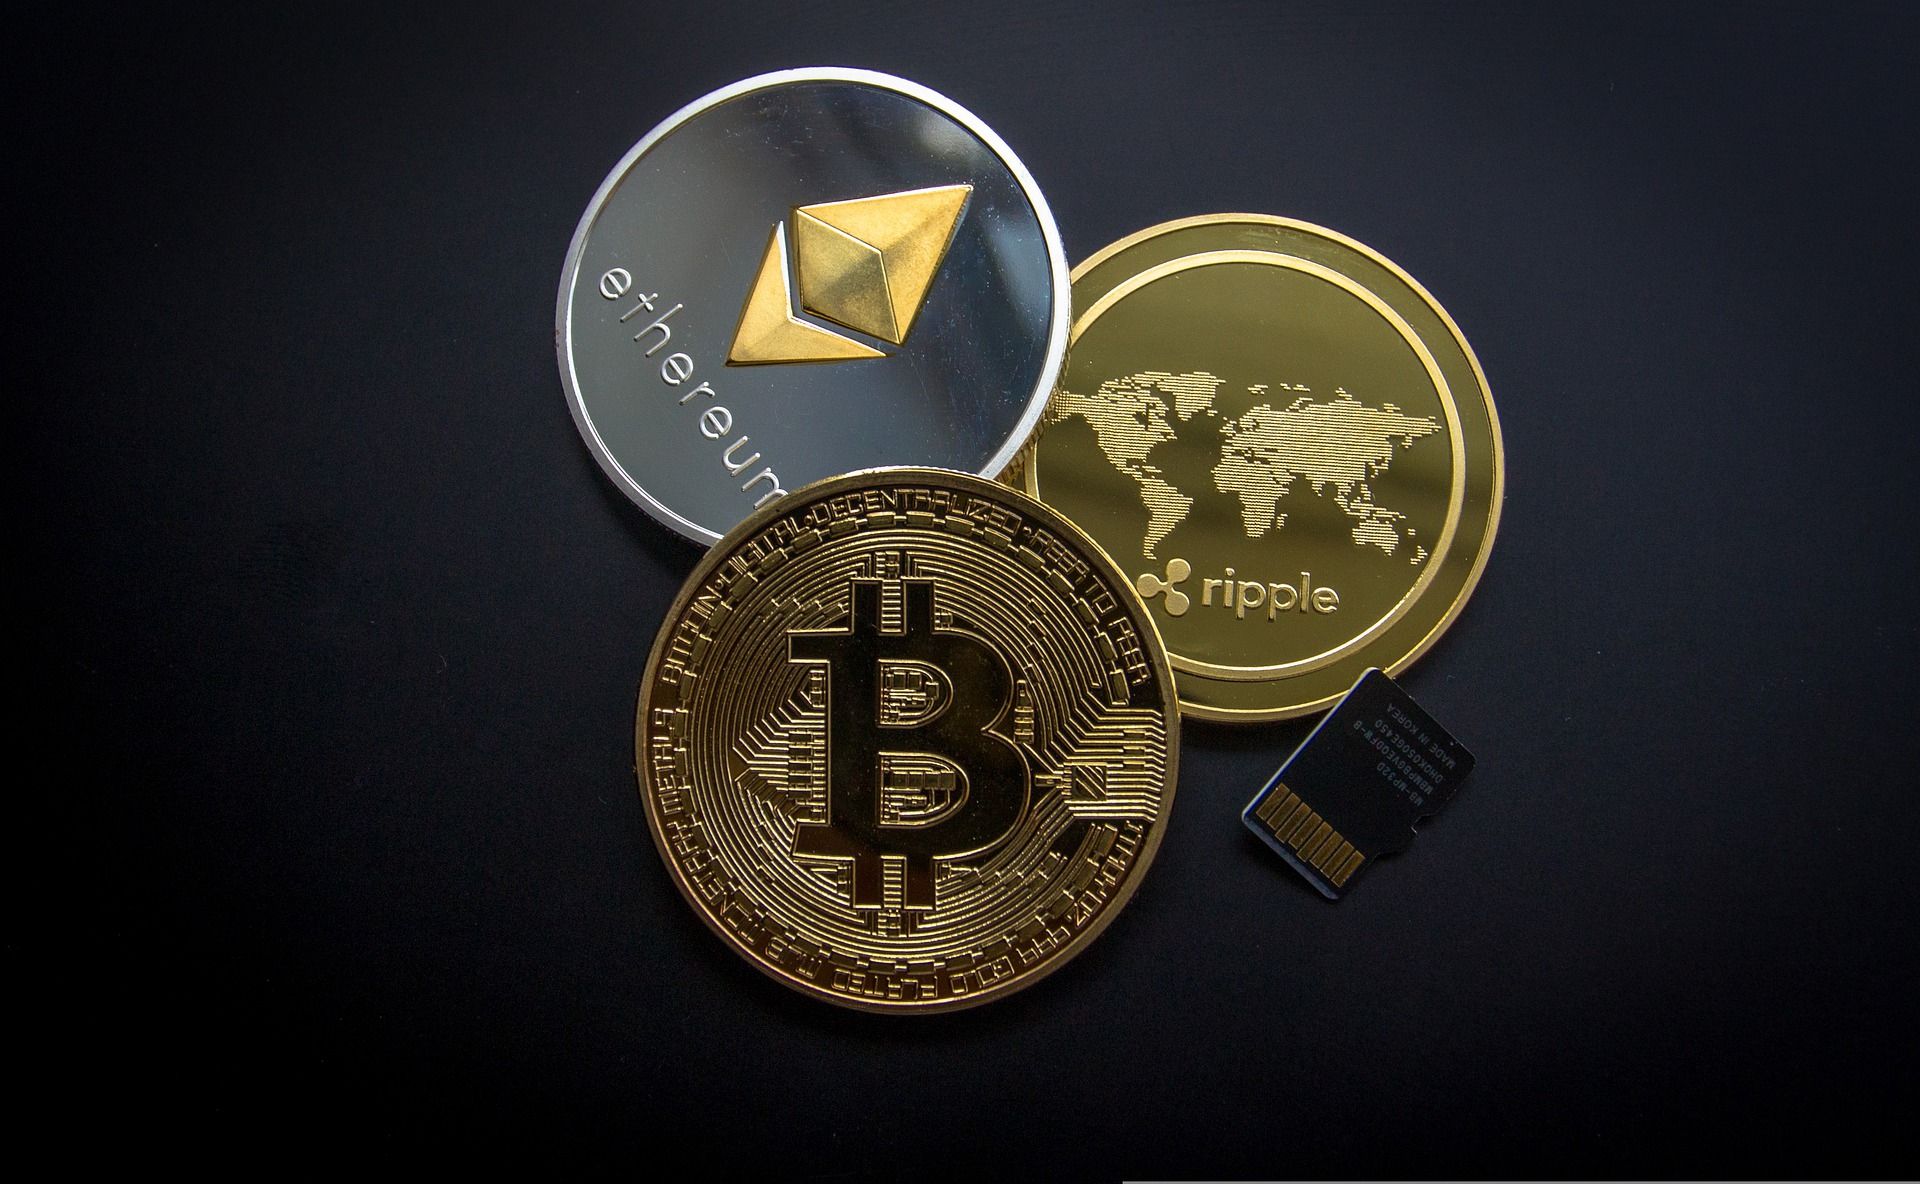 Top 5 cryptocurrencies of the day: Bitcoin down 9%, FTX Token trends at no. 1